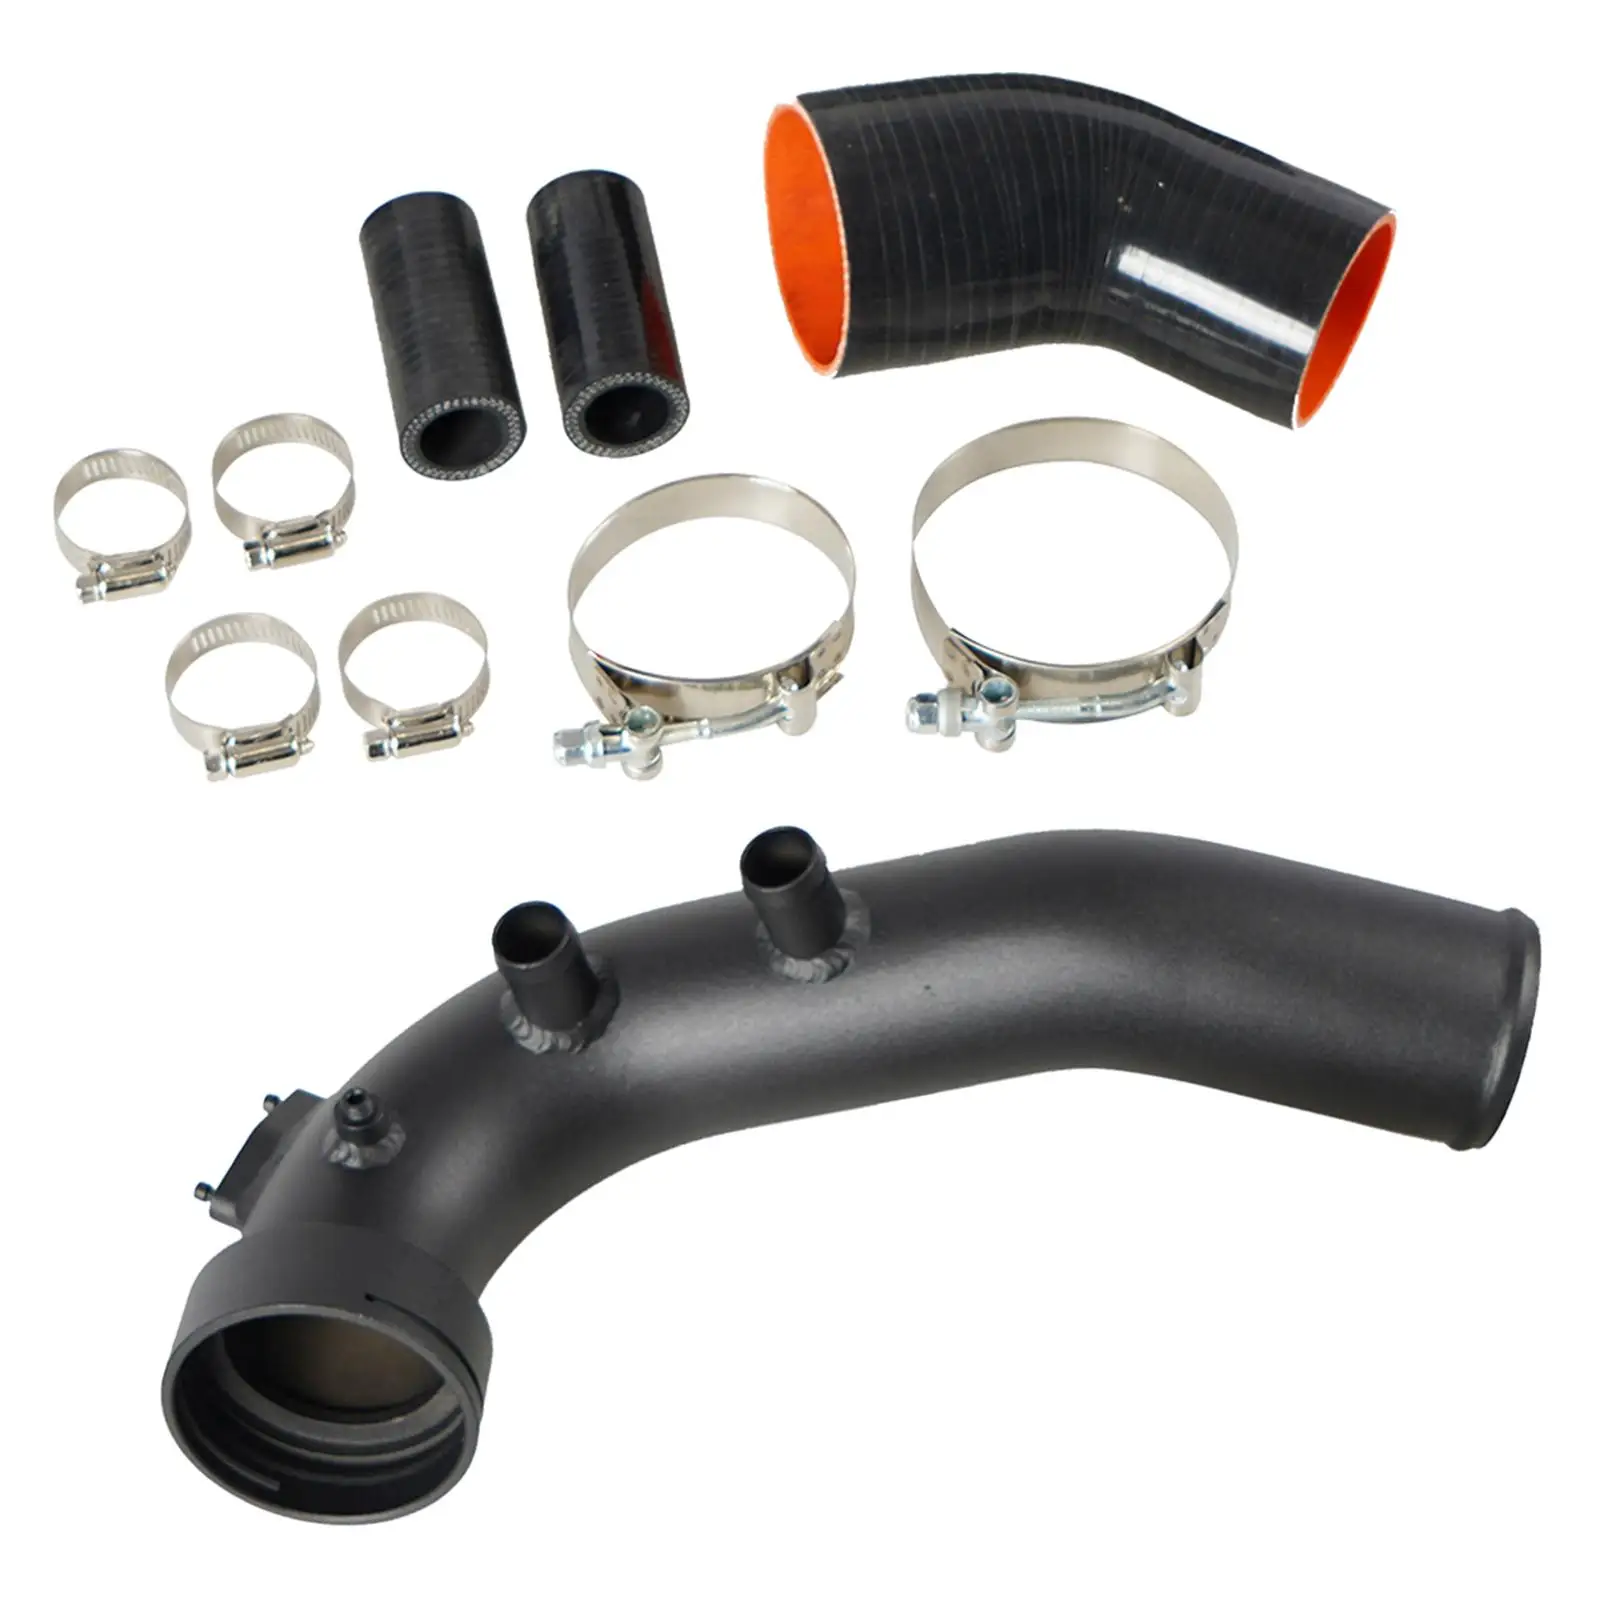 Air Intake Charge Pipe Kit Cold Air Intake System Fit for BMW N54 E88 E90